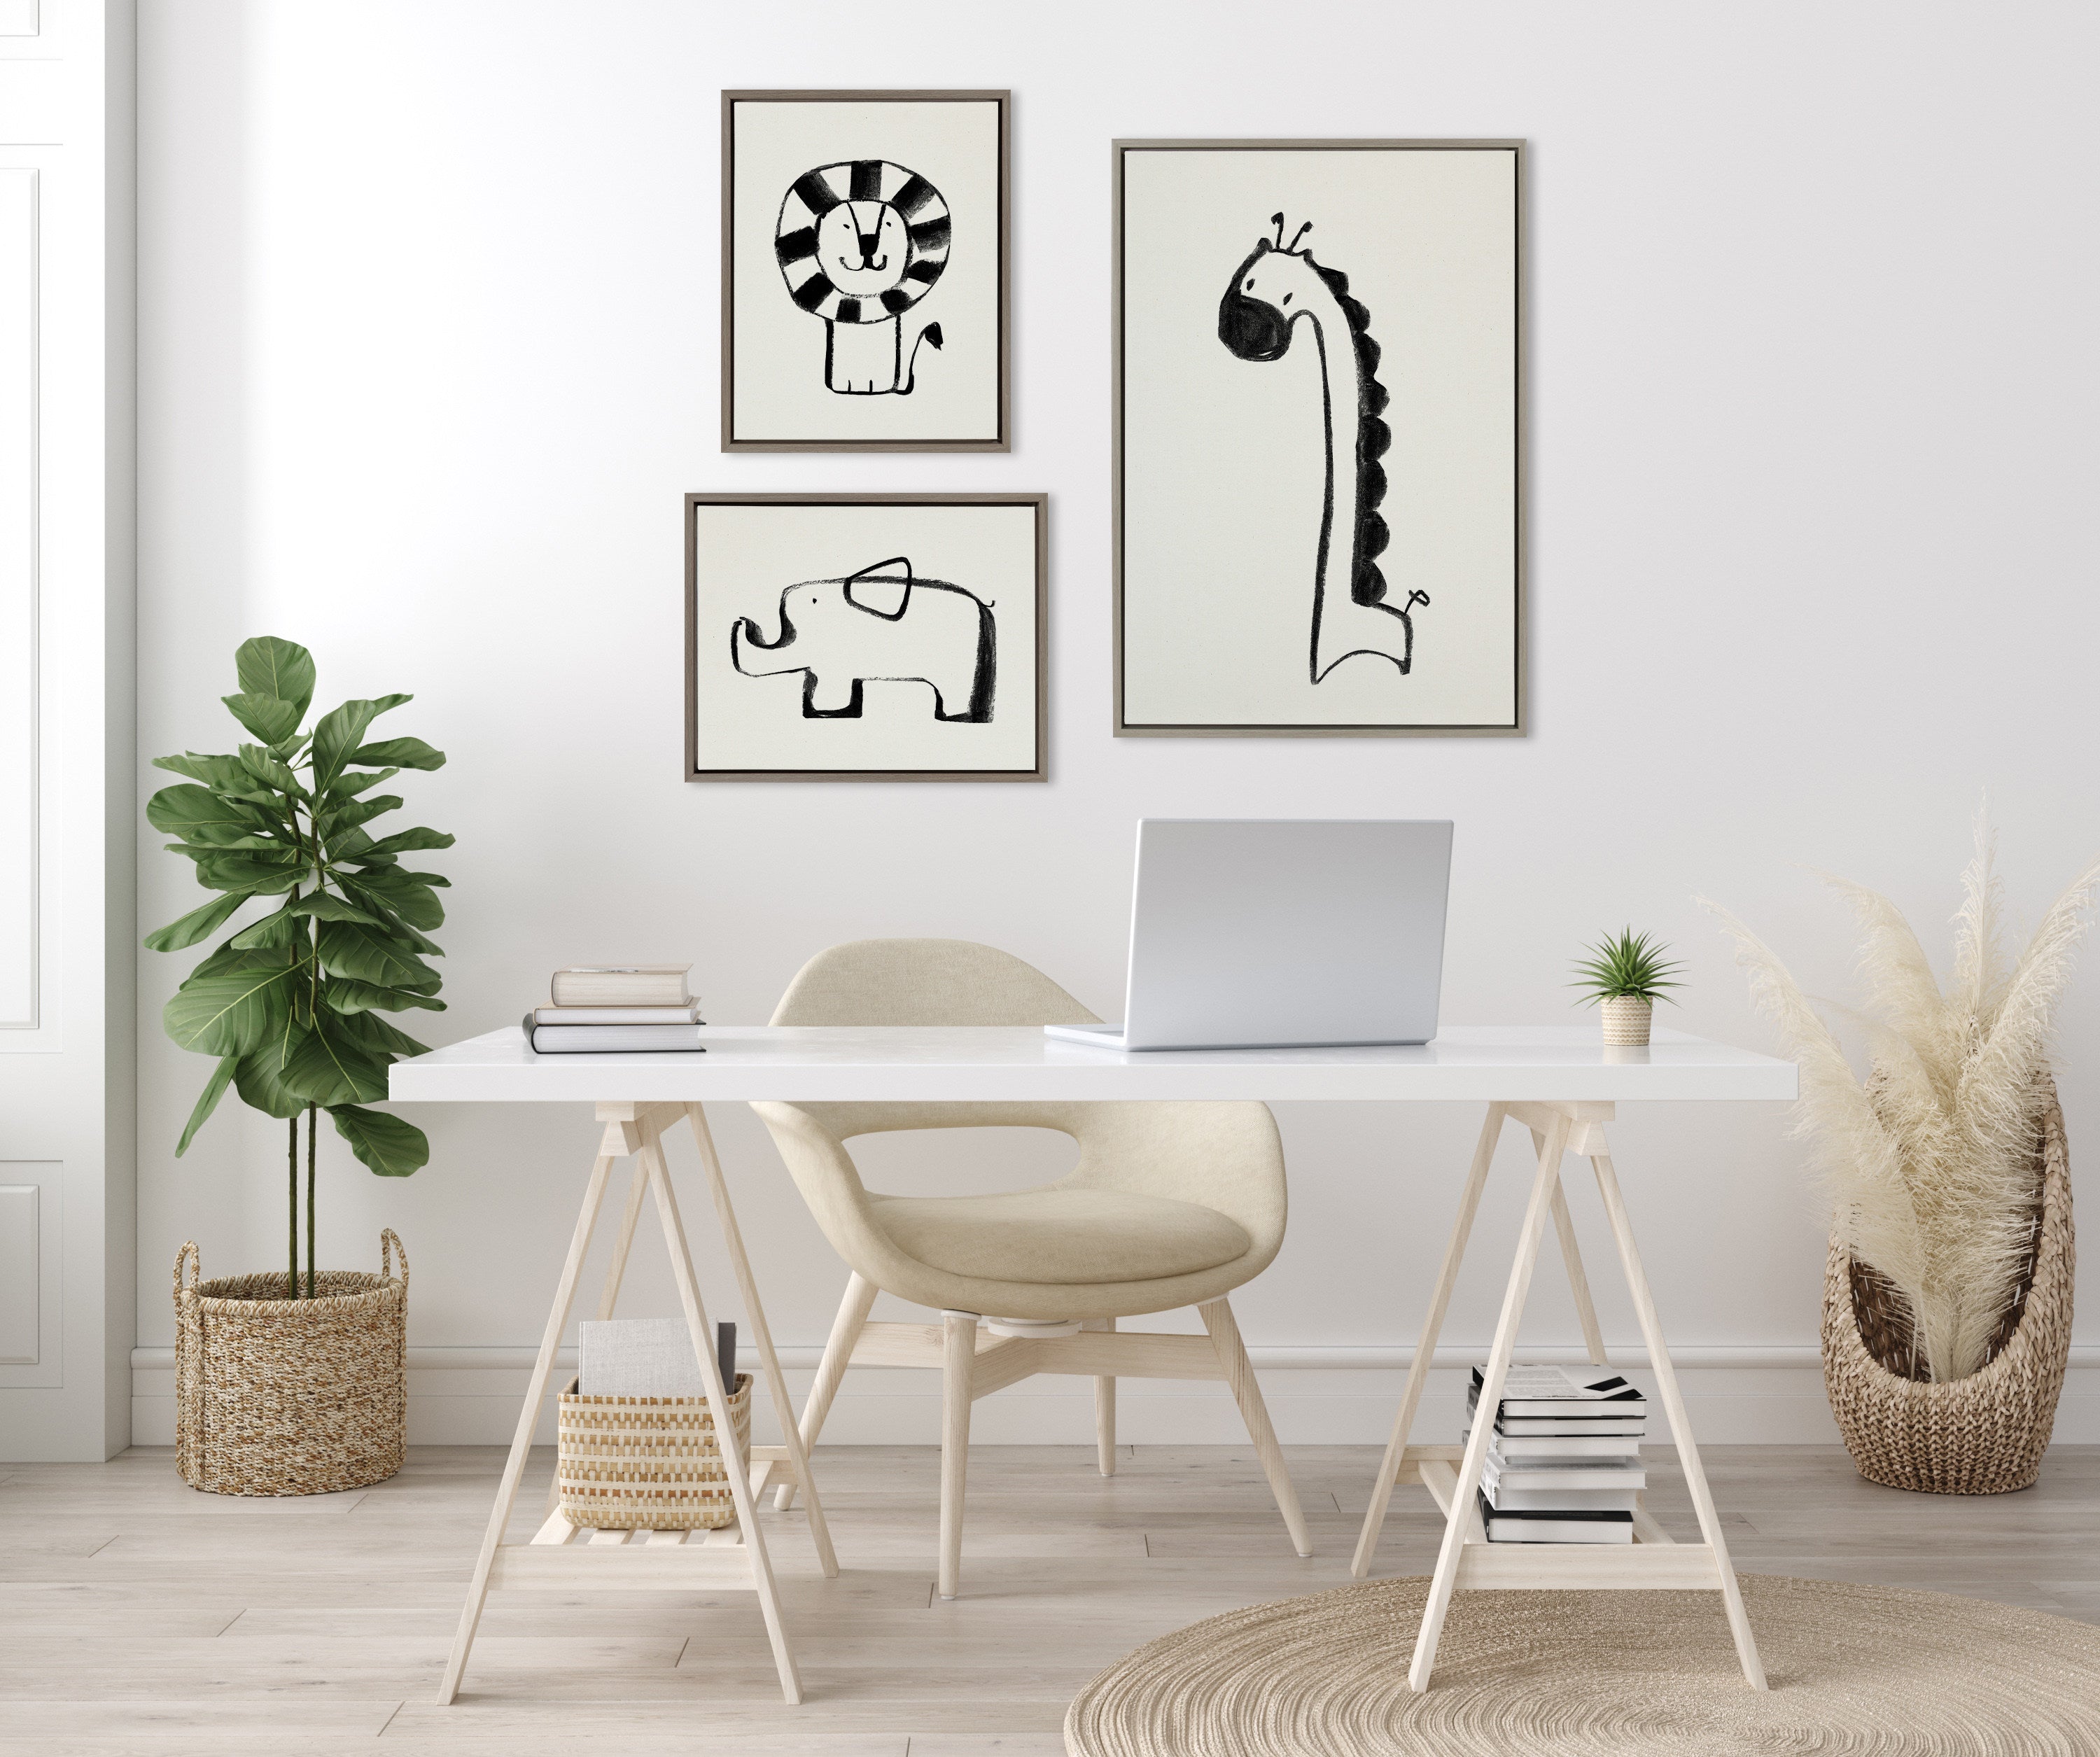 Sylvie 390 Giraffe BW, 409 Lion BW and 400 Elephant BW Framed Canvas Art Set by Teju Reval of SnazzyHues